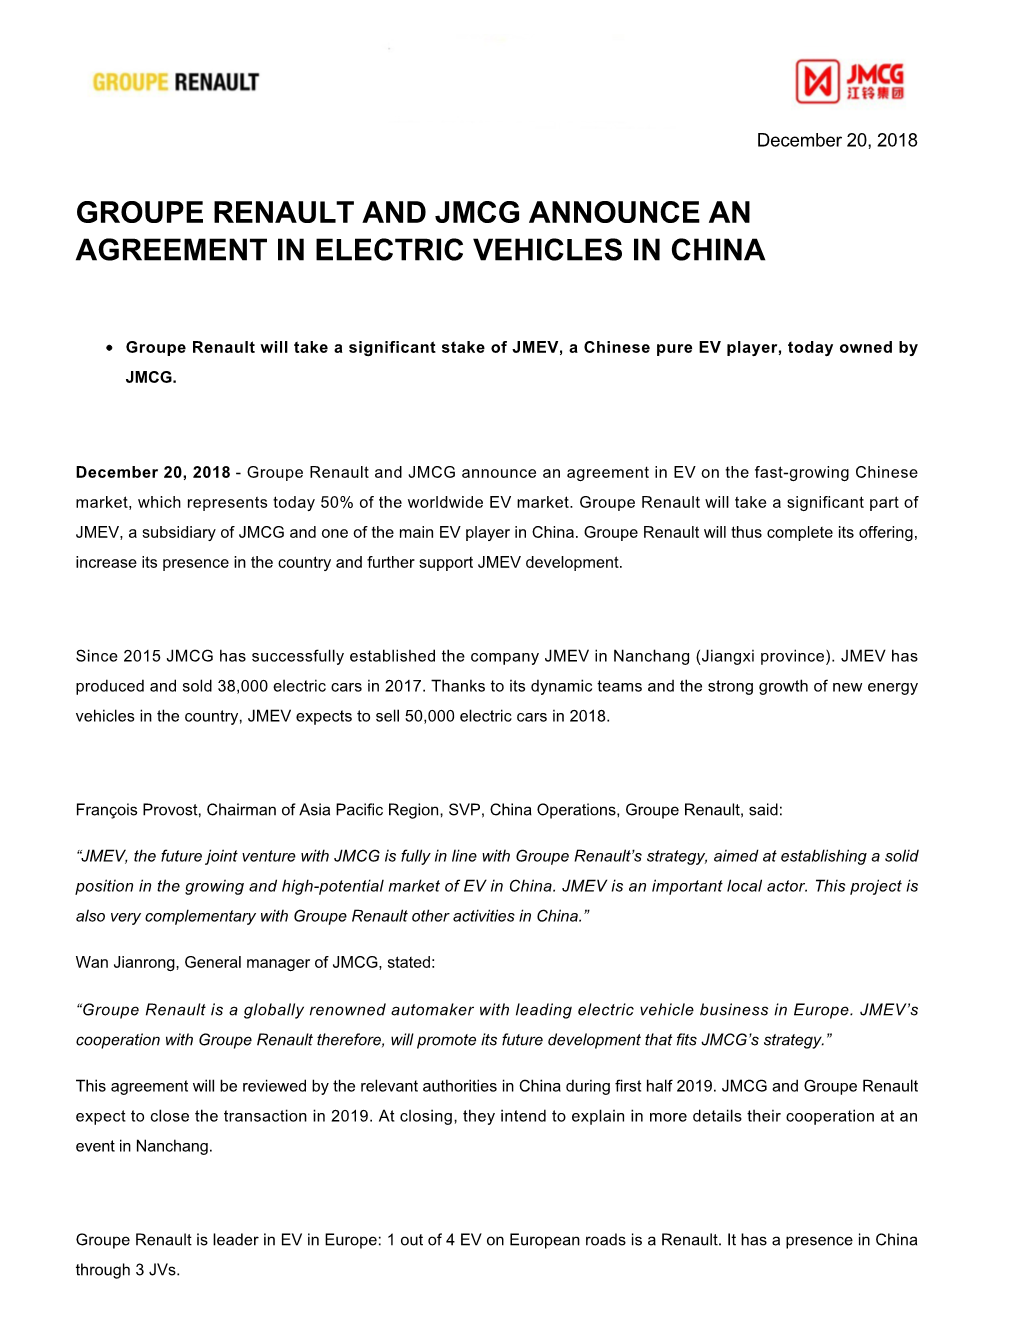 Groupe Renault and Jmcg Announce an Agreement in Electric Vehicles in China